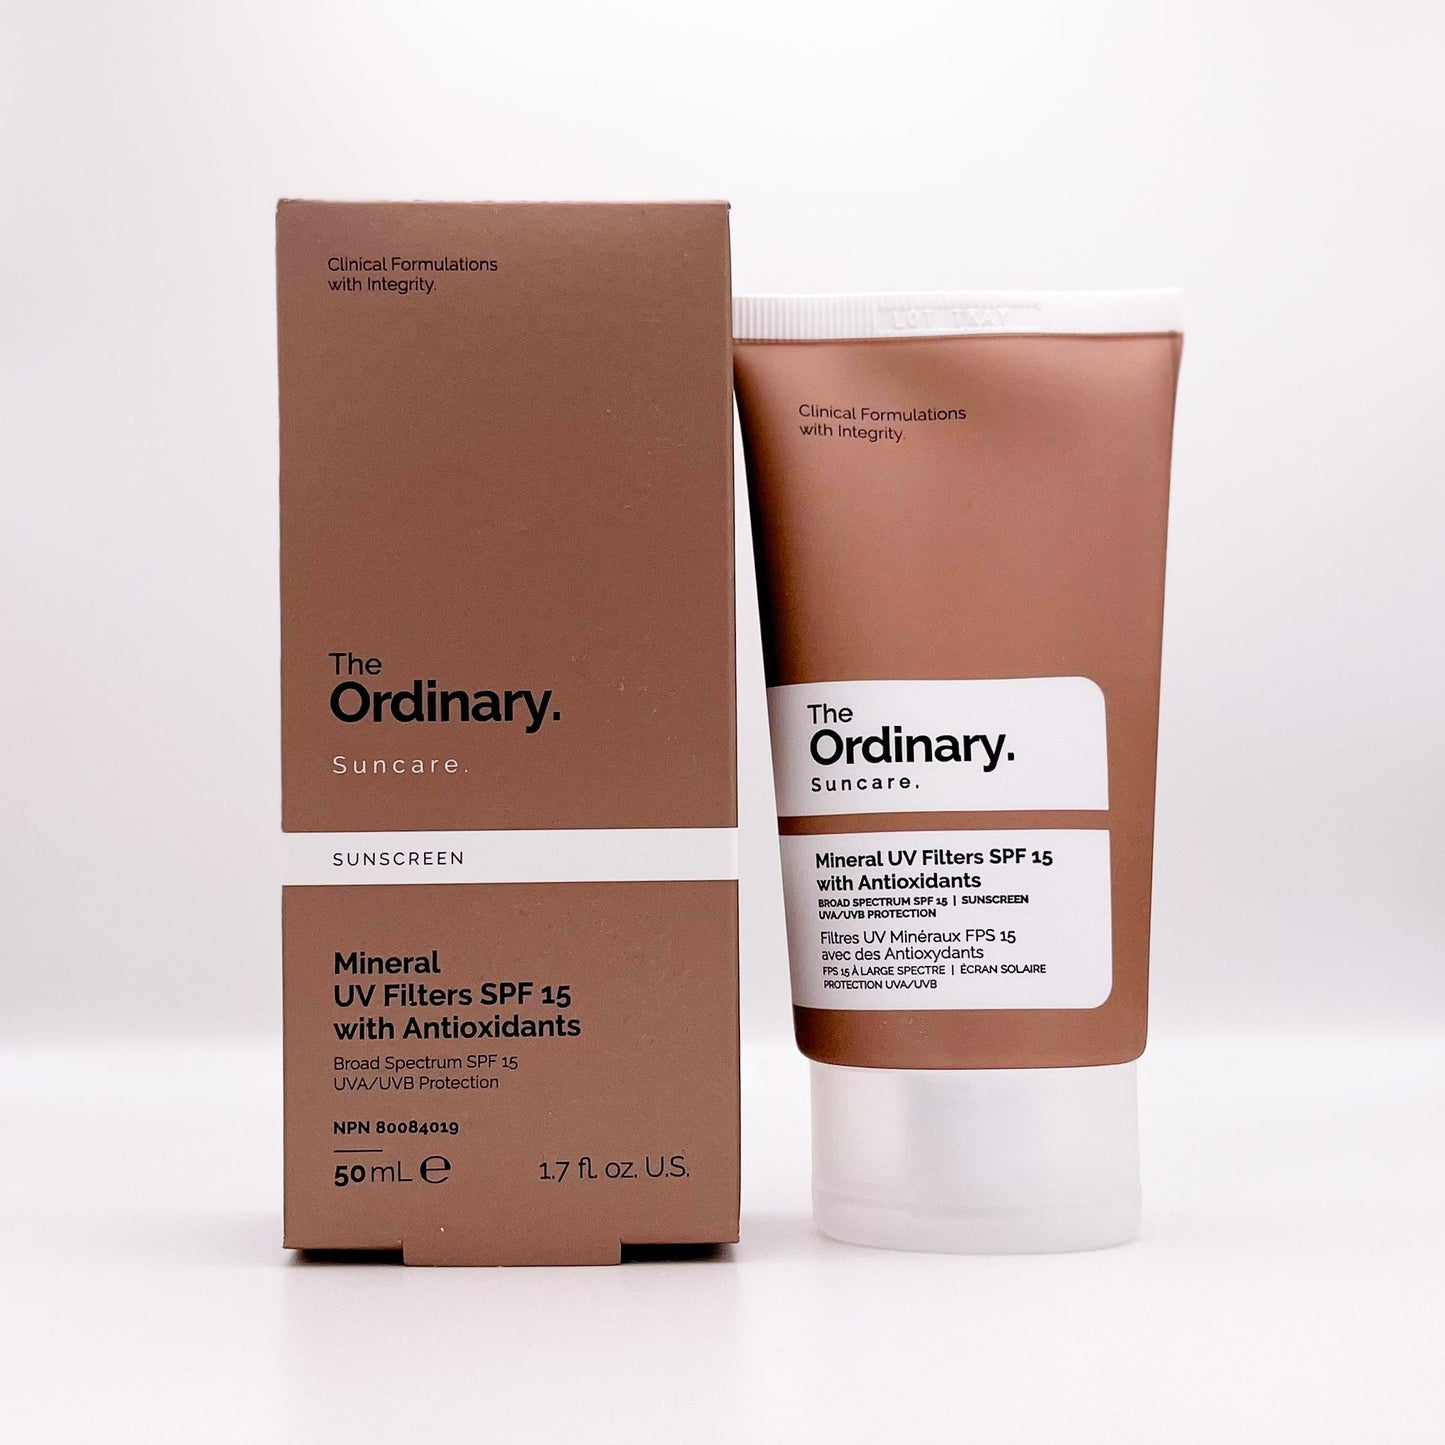 The Ordinary Mineral UV Filters SPF 15